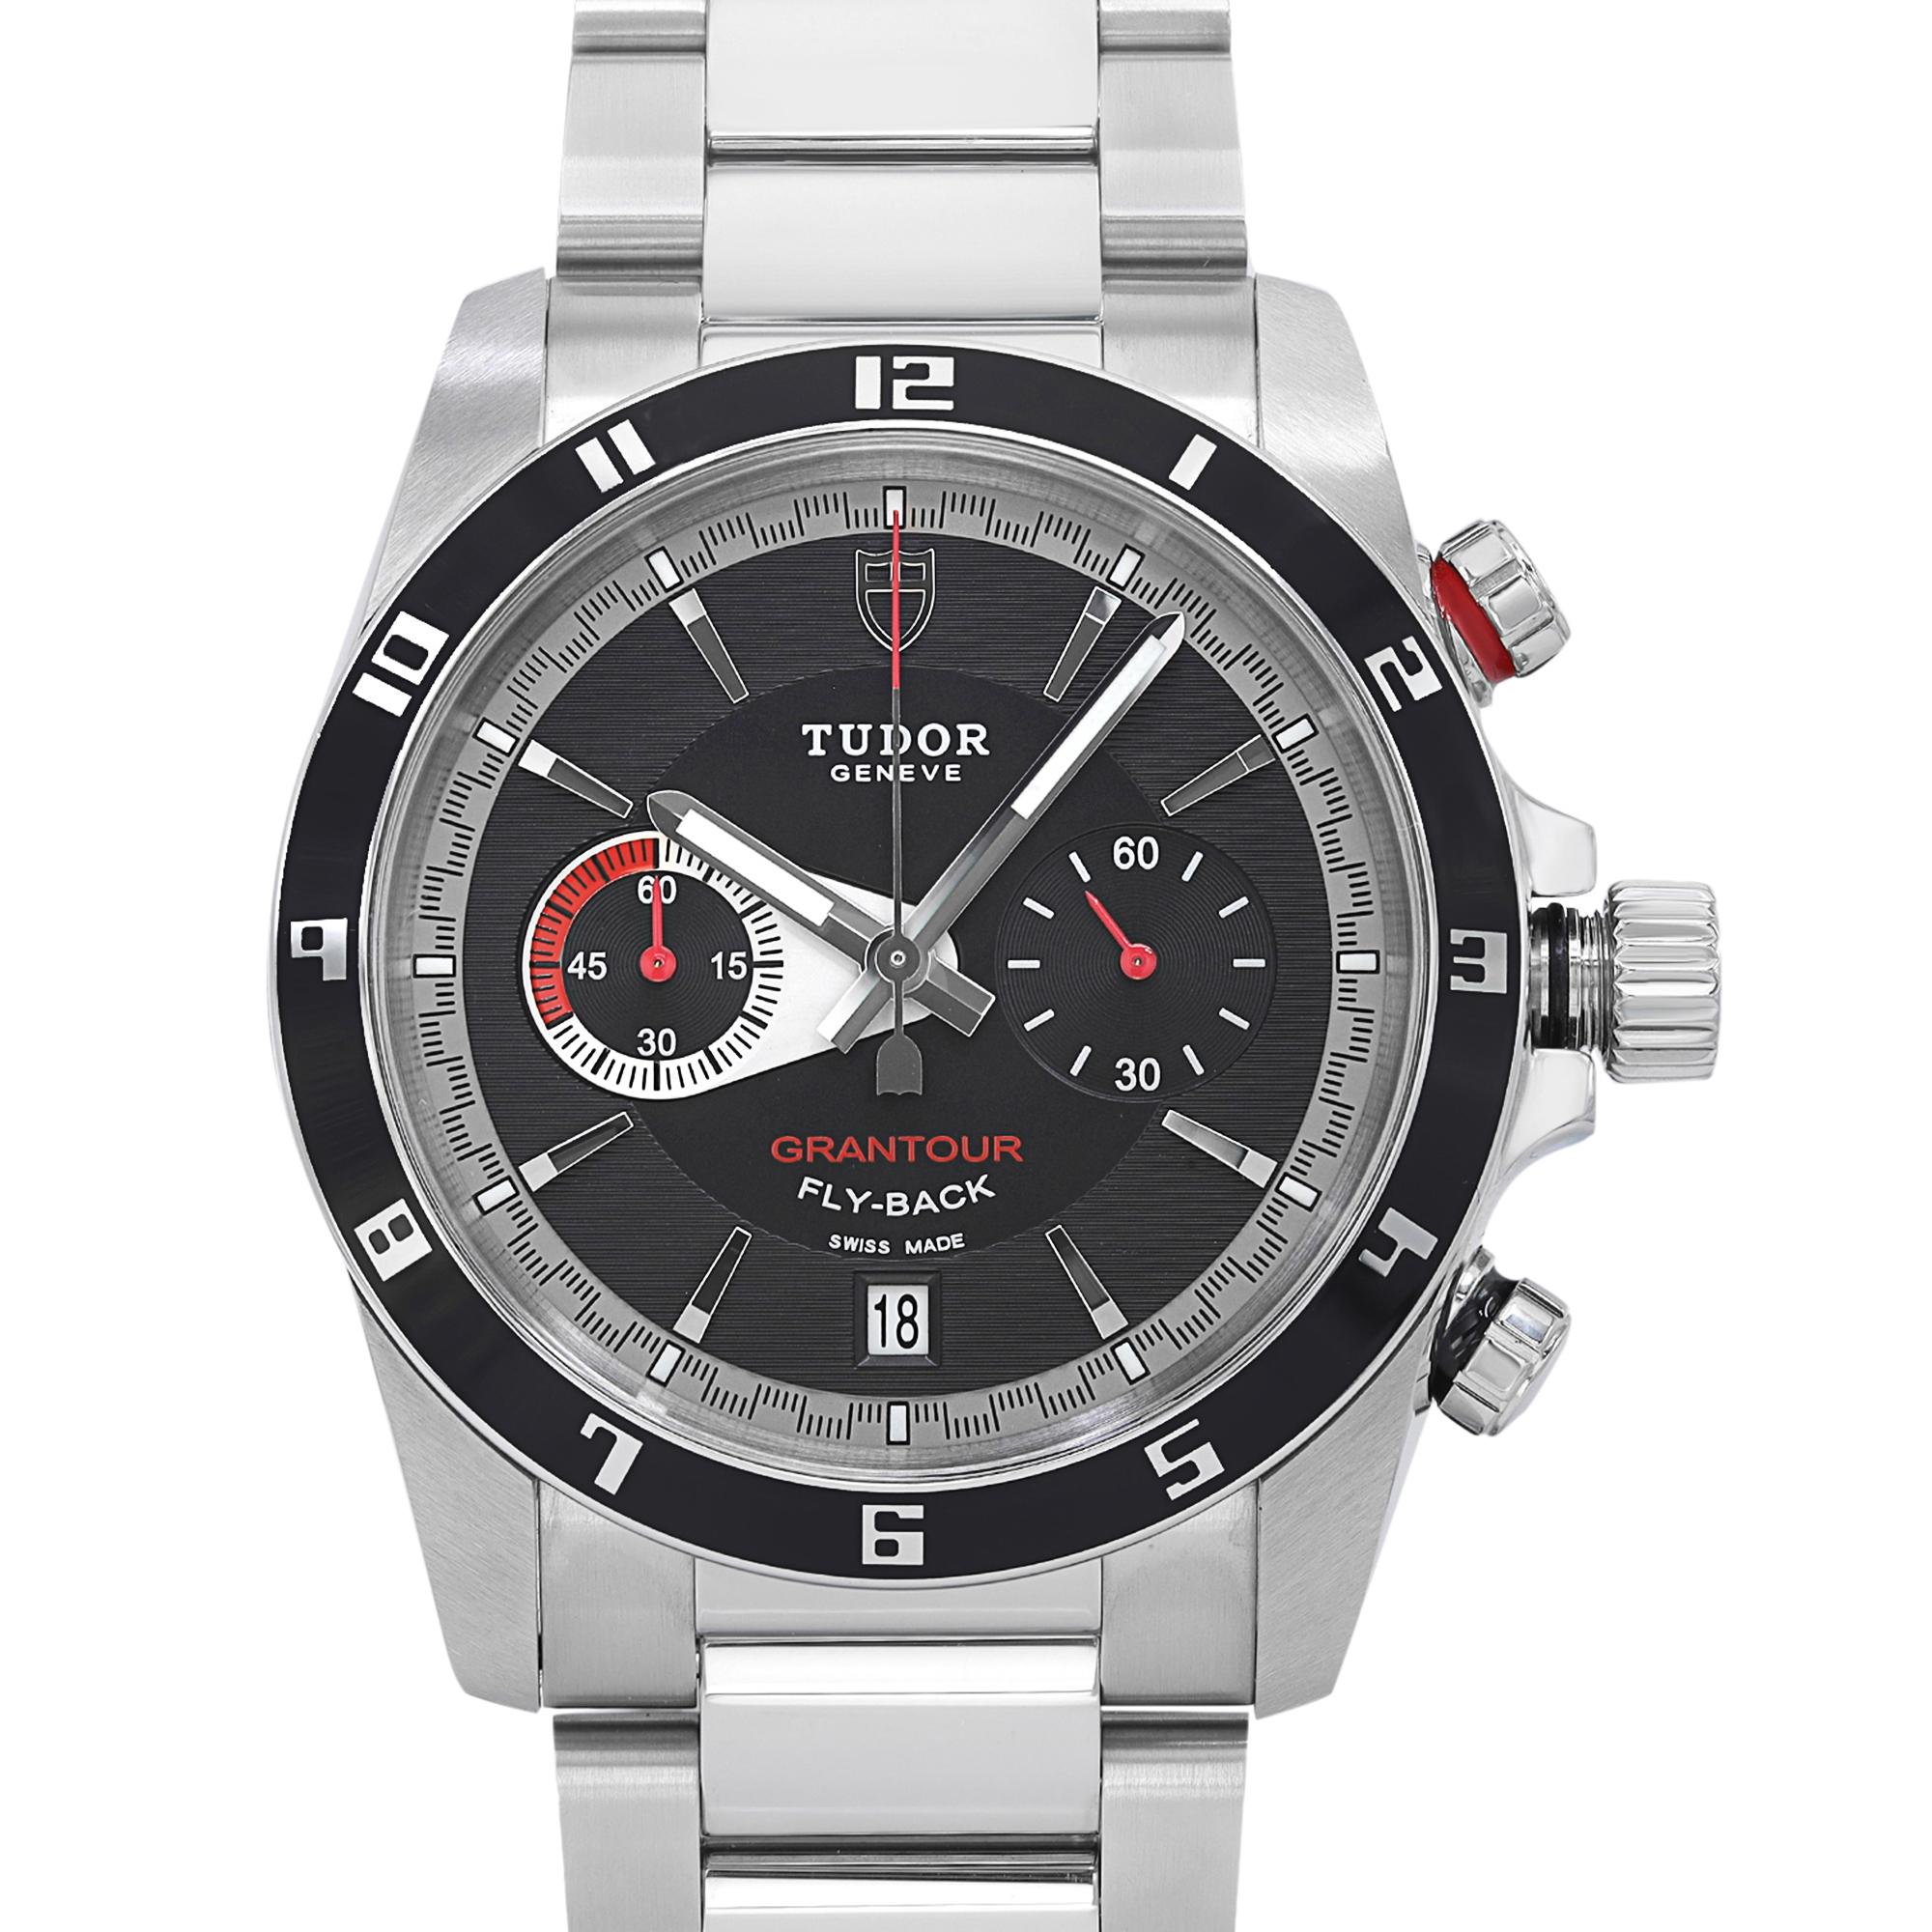 Unworn Tudor Grantour Flyback Men's Watch 20550N-95730BLK. This Beautiful Timepiece is Powered by Mechanical (Automatic) Movement And Features: Round Stainless Steel Case with a Stainless Steel Bracelet. Fixed arabic numeral stainless steel bezel